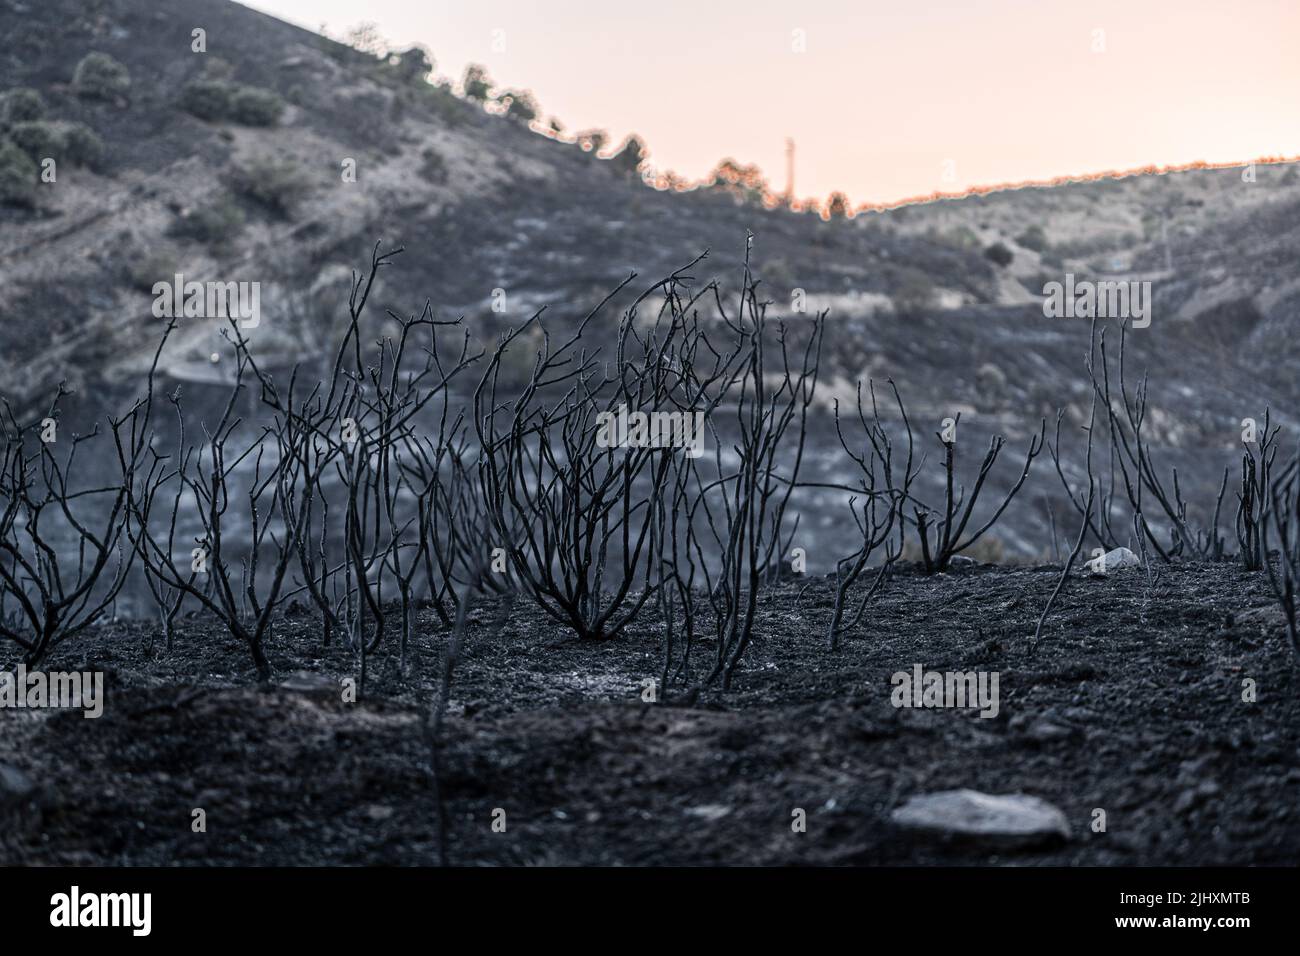 The mountain of Valdepeñas de la Sierra devastated by the flames of the fire. The Red Cross shelter in the town of Uceda, next to Valdepeñas de la Sierra, welcomed more than 150 people from the towns affected by the fire. The forest fire that lasted more than 48 hours in Valdepeñas de la Sierra, 80 kilometers from Madrid, Spain, destroyed more than 3,000 hectares. The authorities suspect that the fire could have been caused by a pyromaniac during the days of high heat temperatures recorded in Spain. (Photo by Diego Radames/SOPA Images/Sipa USA) Stock Photo